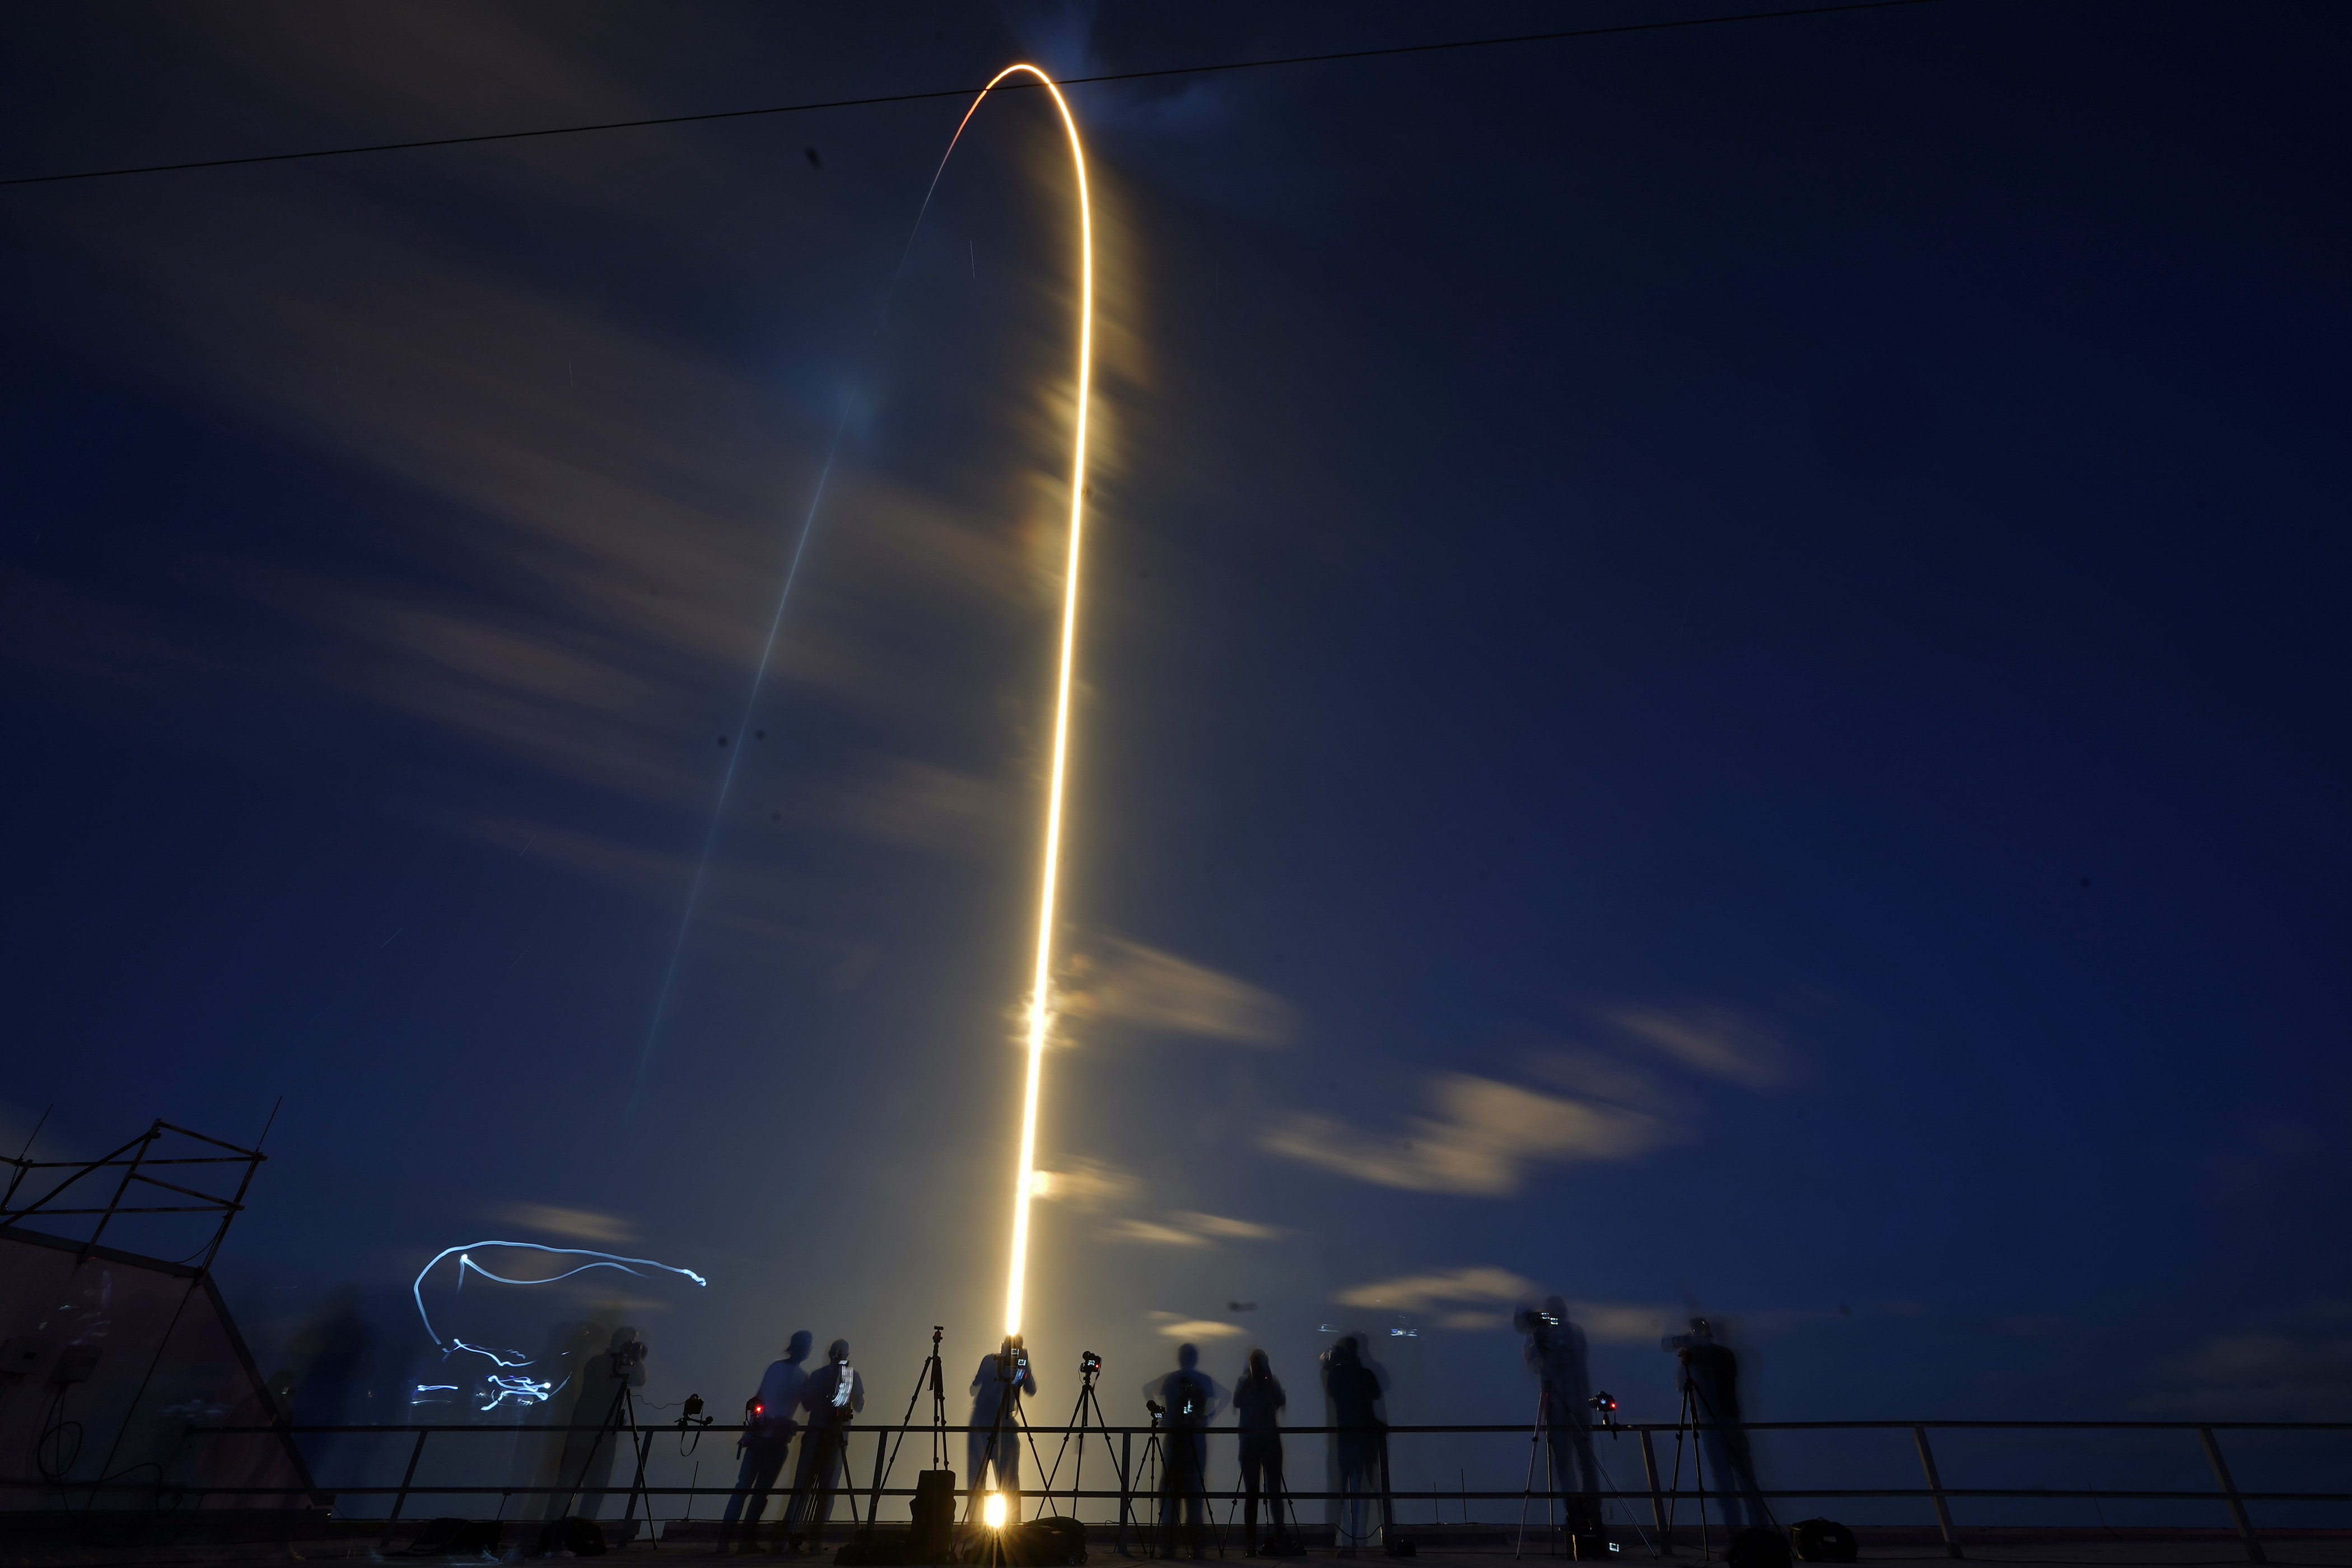 A SpaceX Falcon 9 rocket, with four private citizens onboard, lifts off in this time-exposure photo from Kennedy Space Center's Launch Pad 39-A, Wednesday, Sept. 15, 2021, in Cape Canaveral, Fla. (AP Photo/John Raoux)